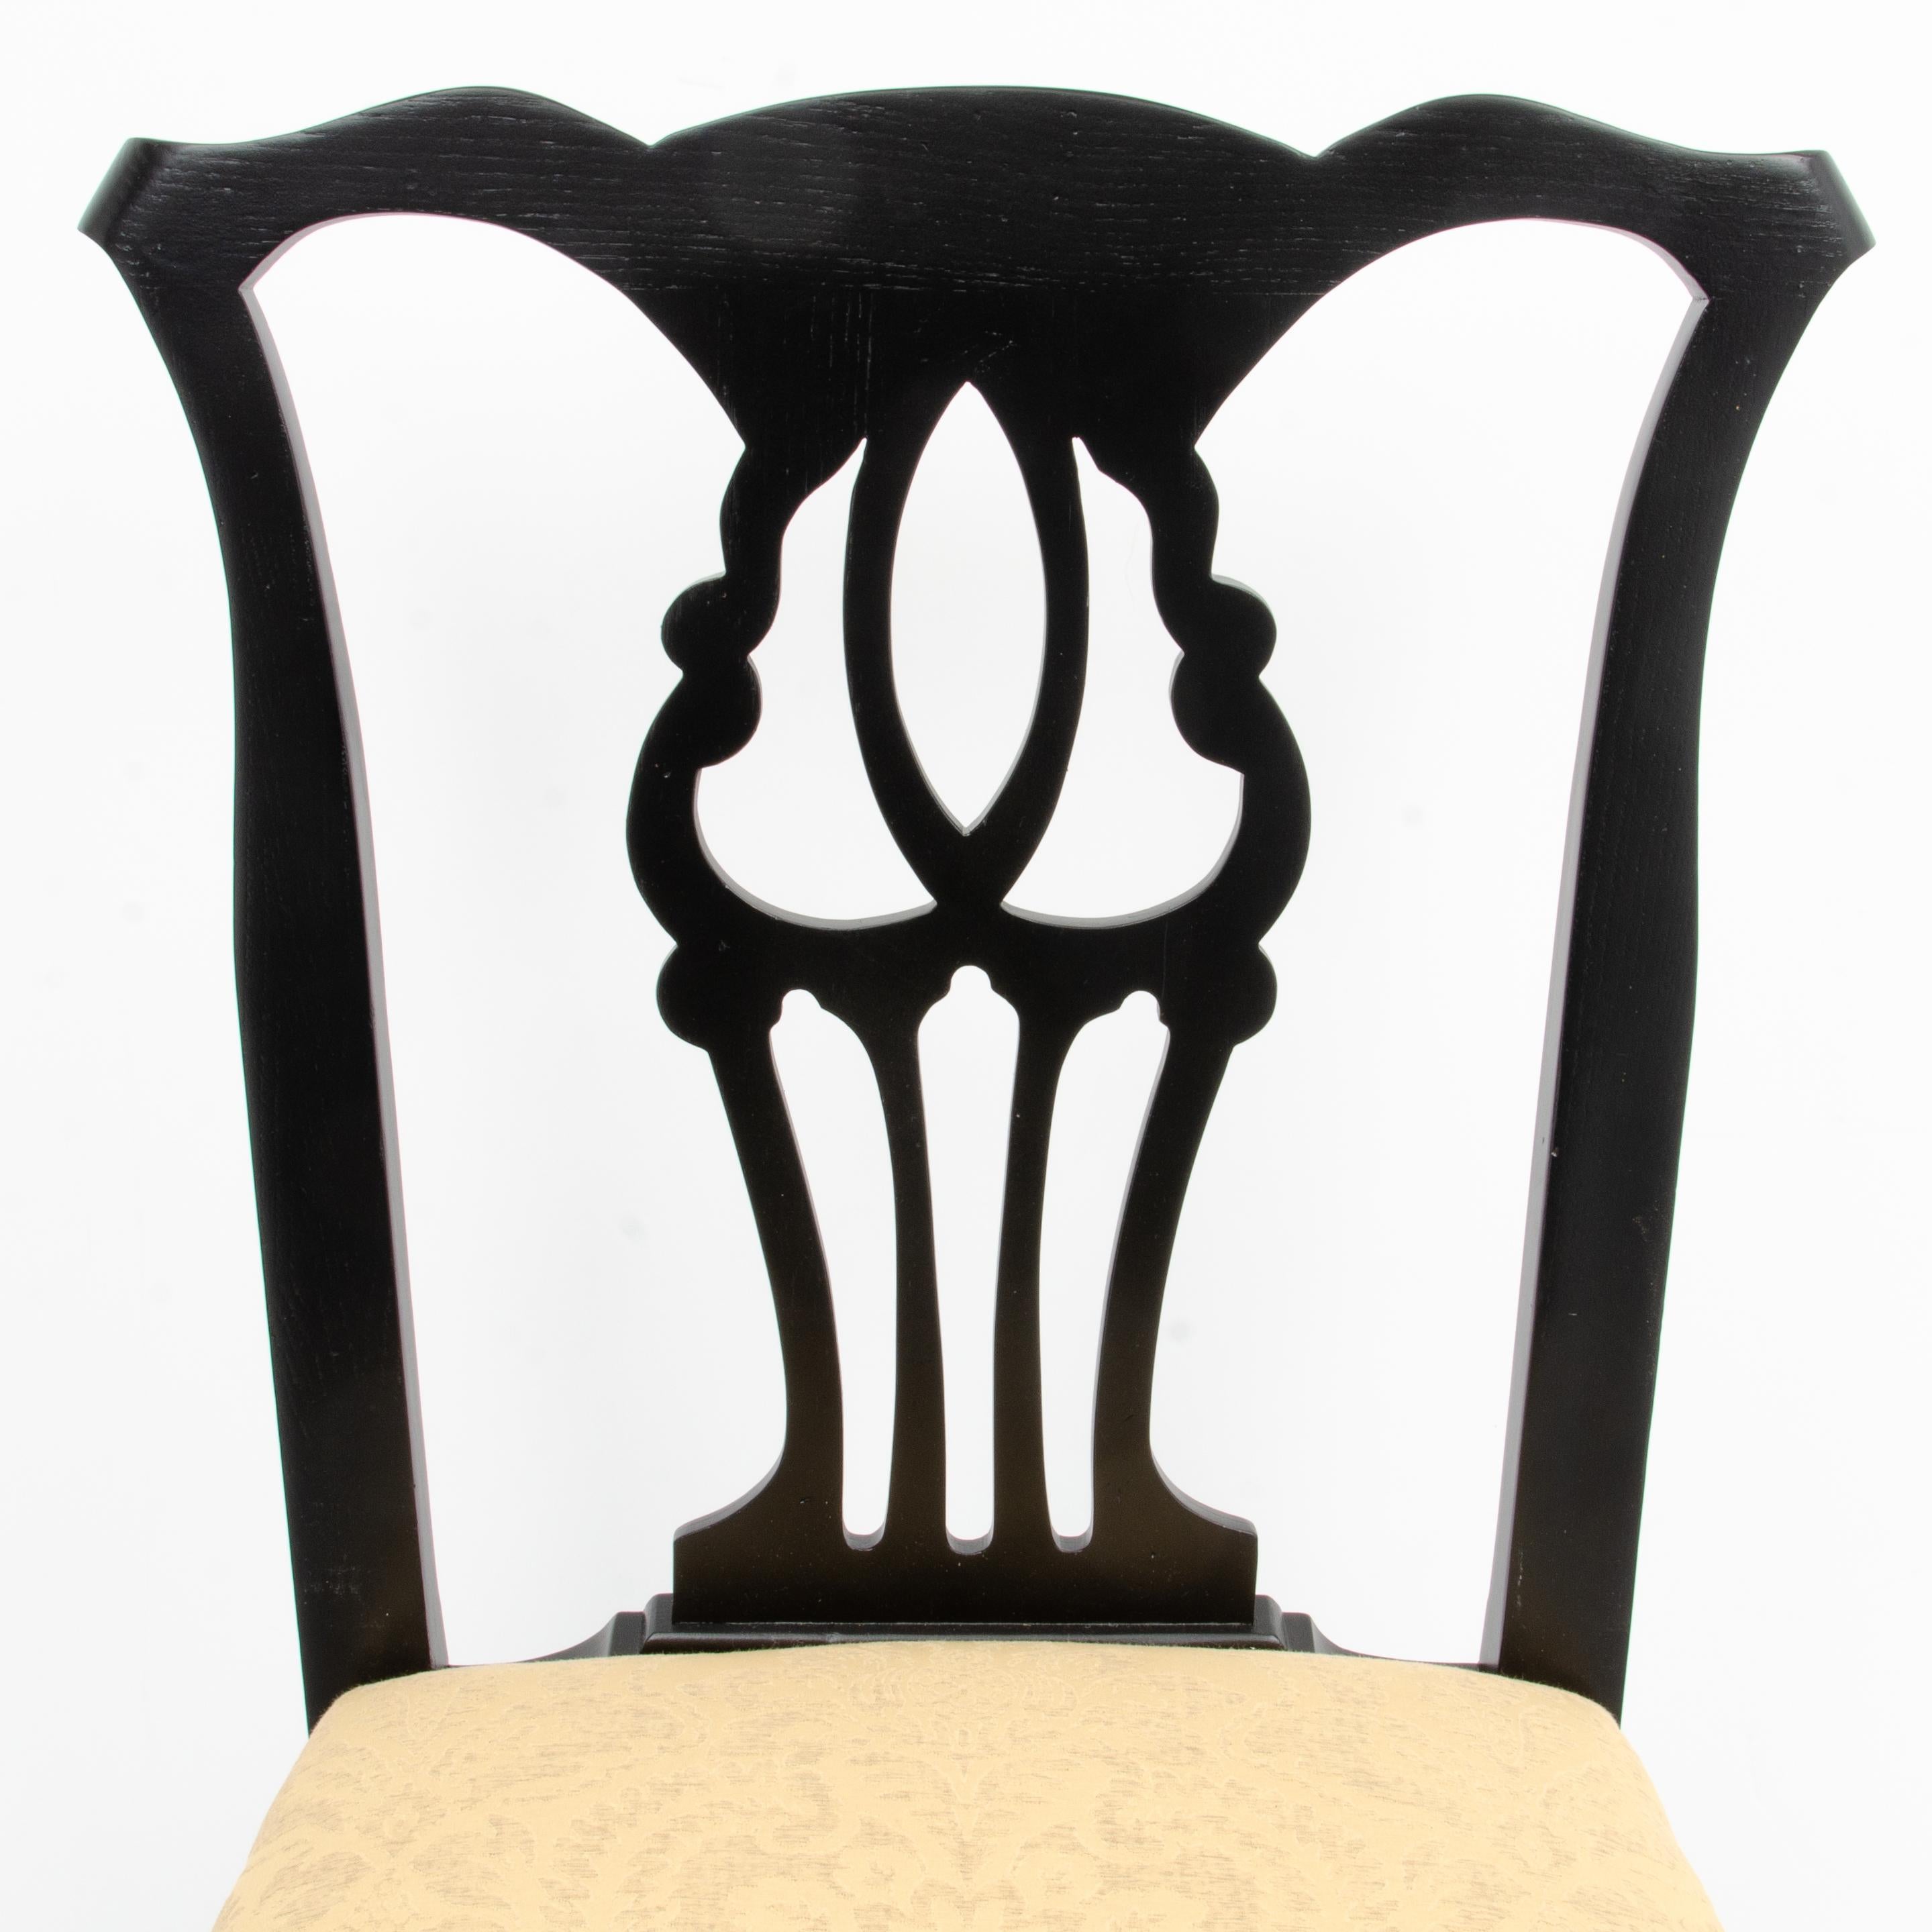 Black Lacquer John Stuart Chippendale Dining Chairs Mid Century - a Set of 6 For Sale 6